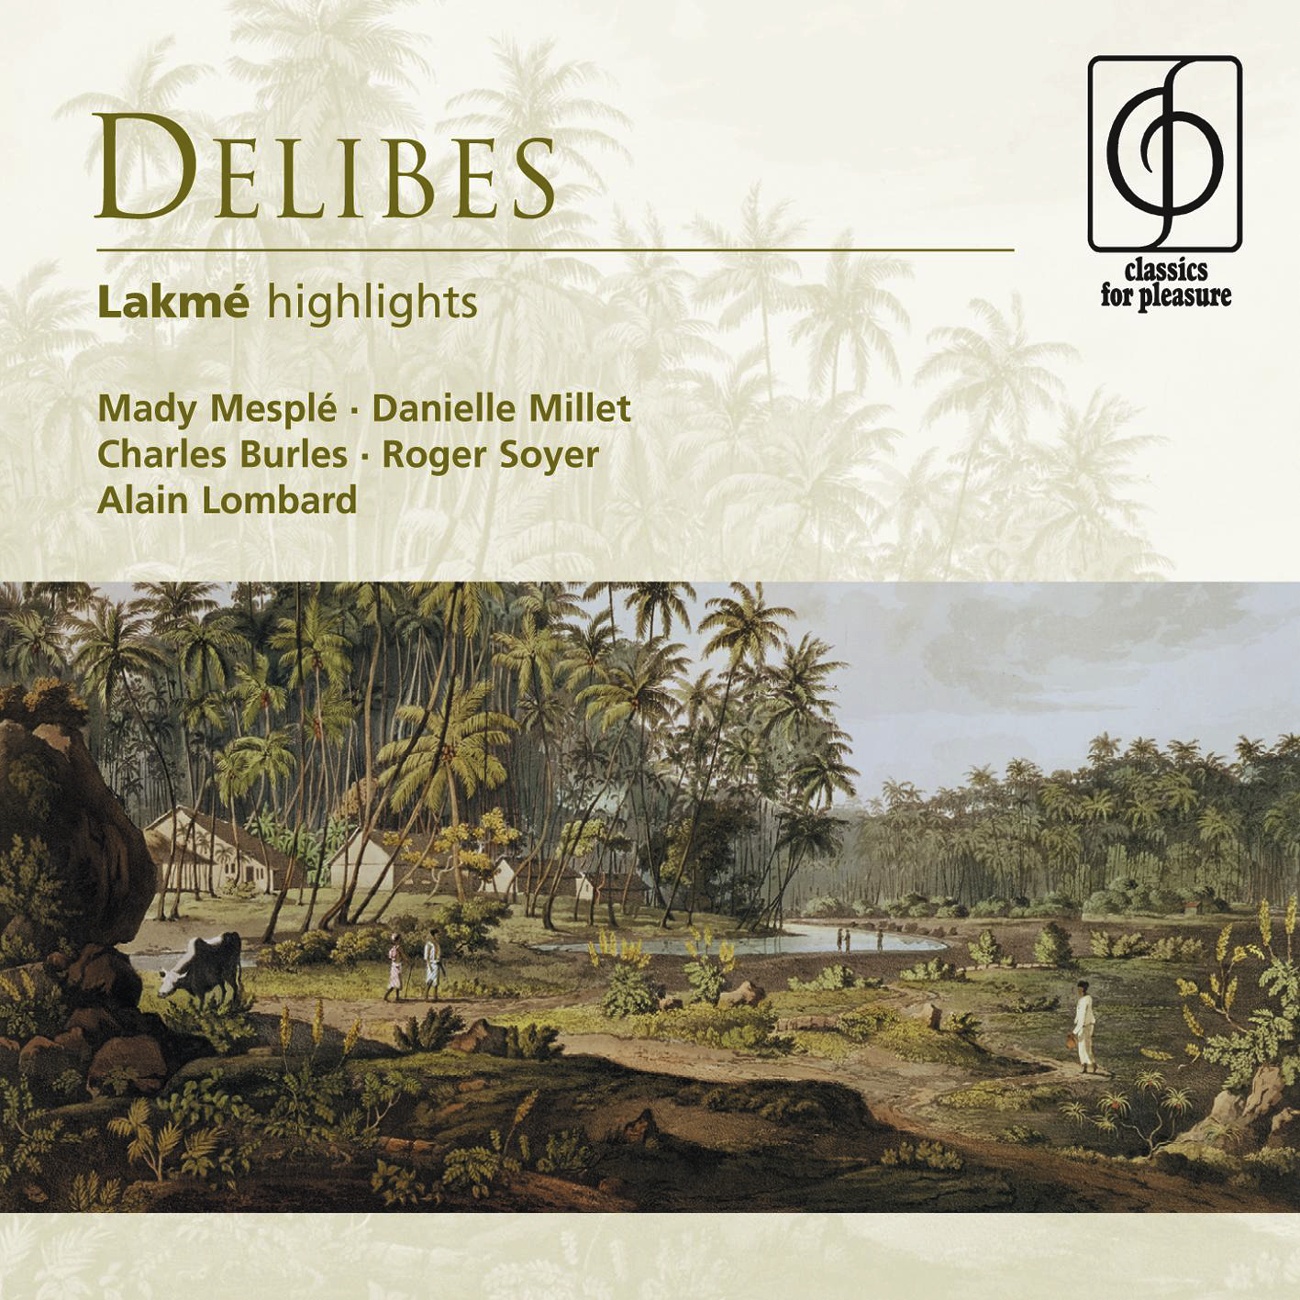 Delibes: Lakme highlights